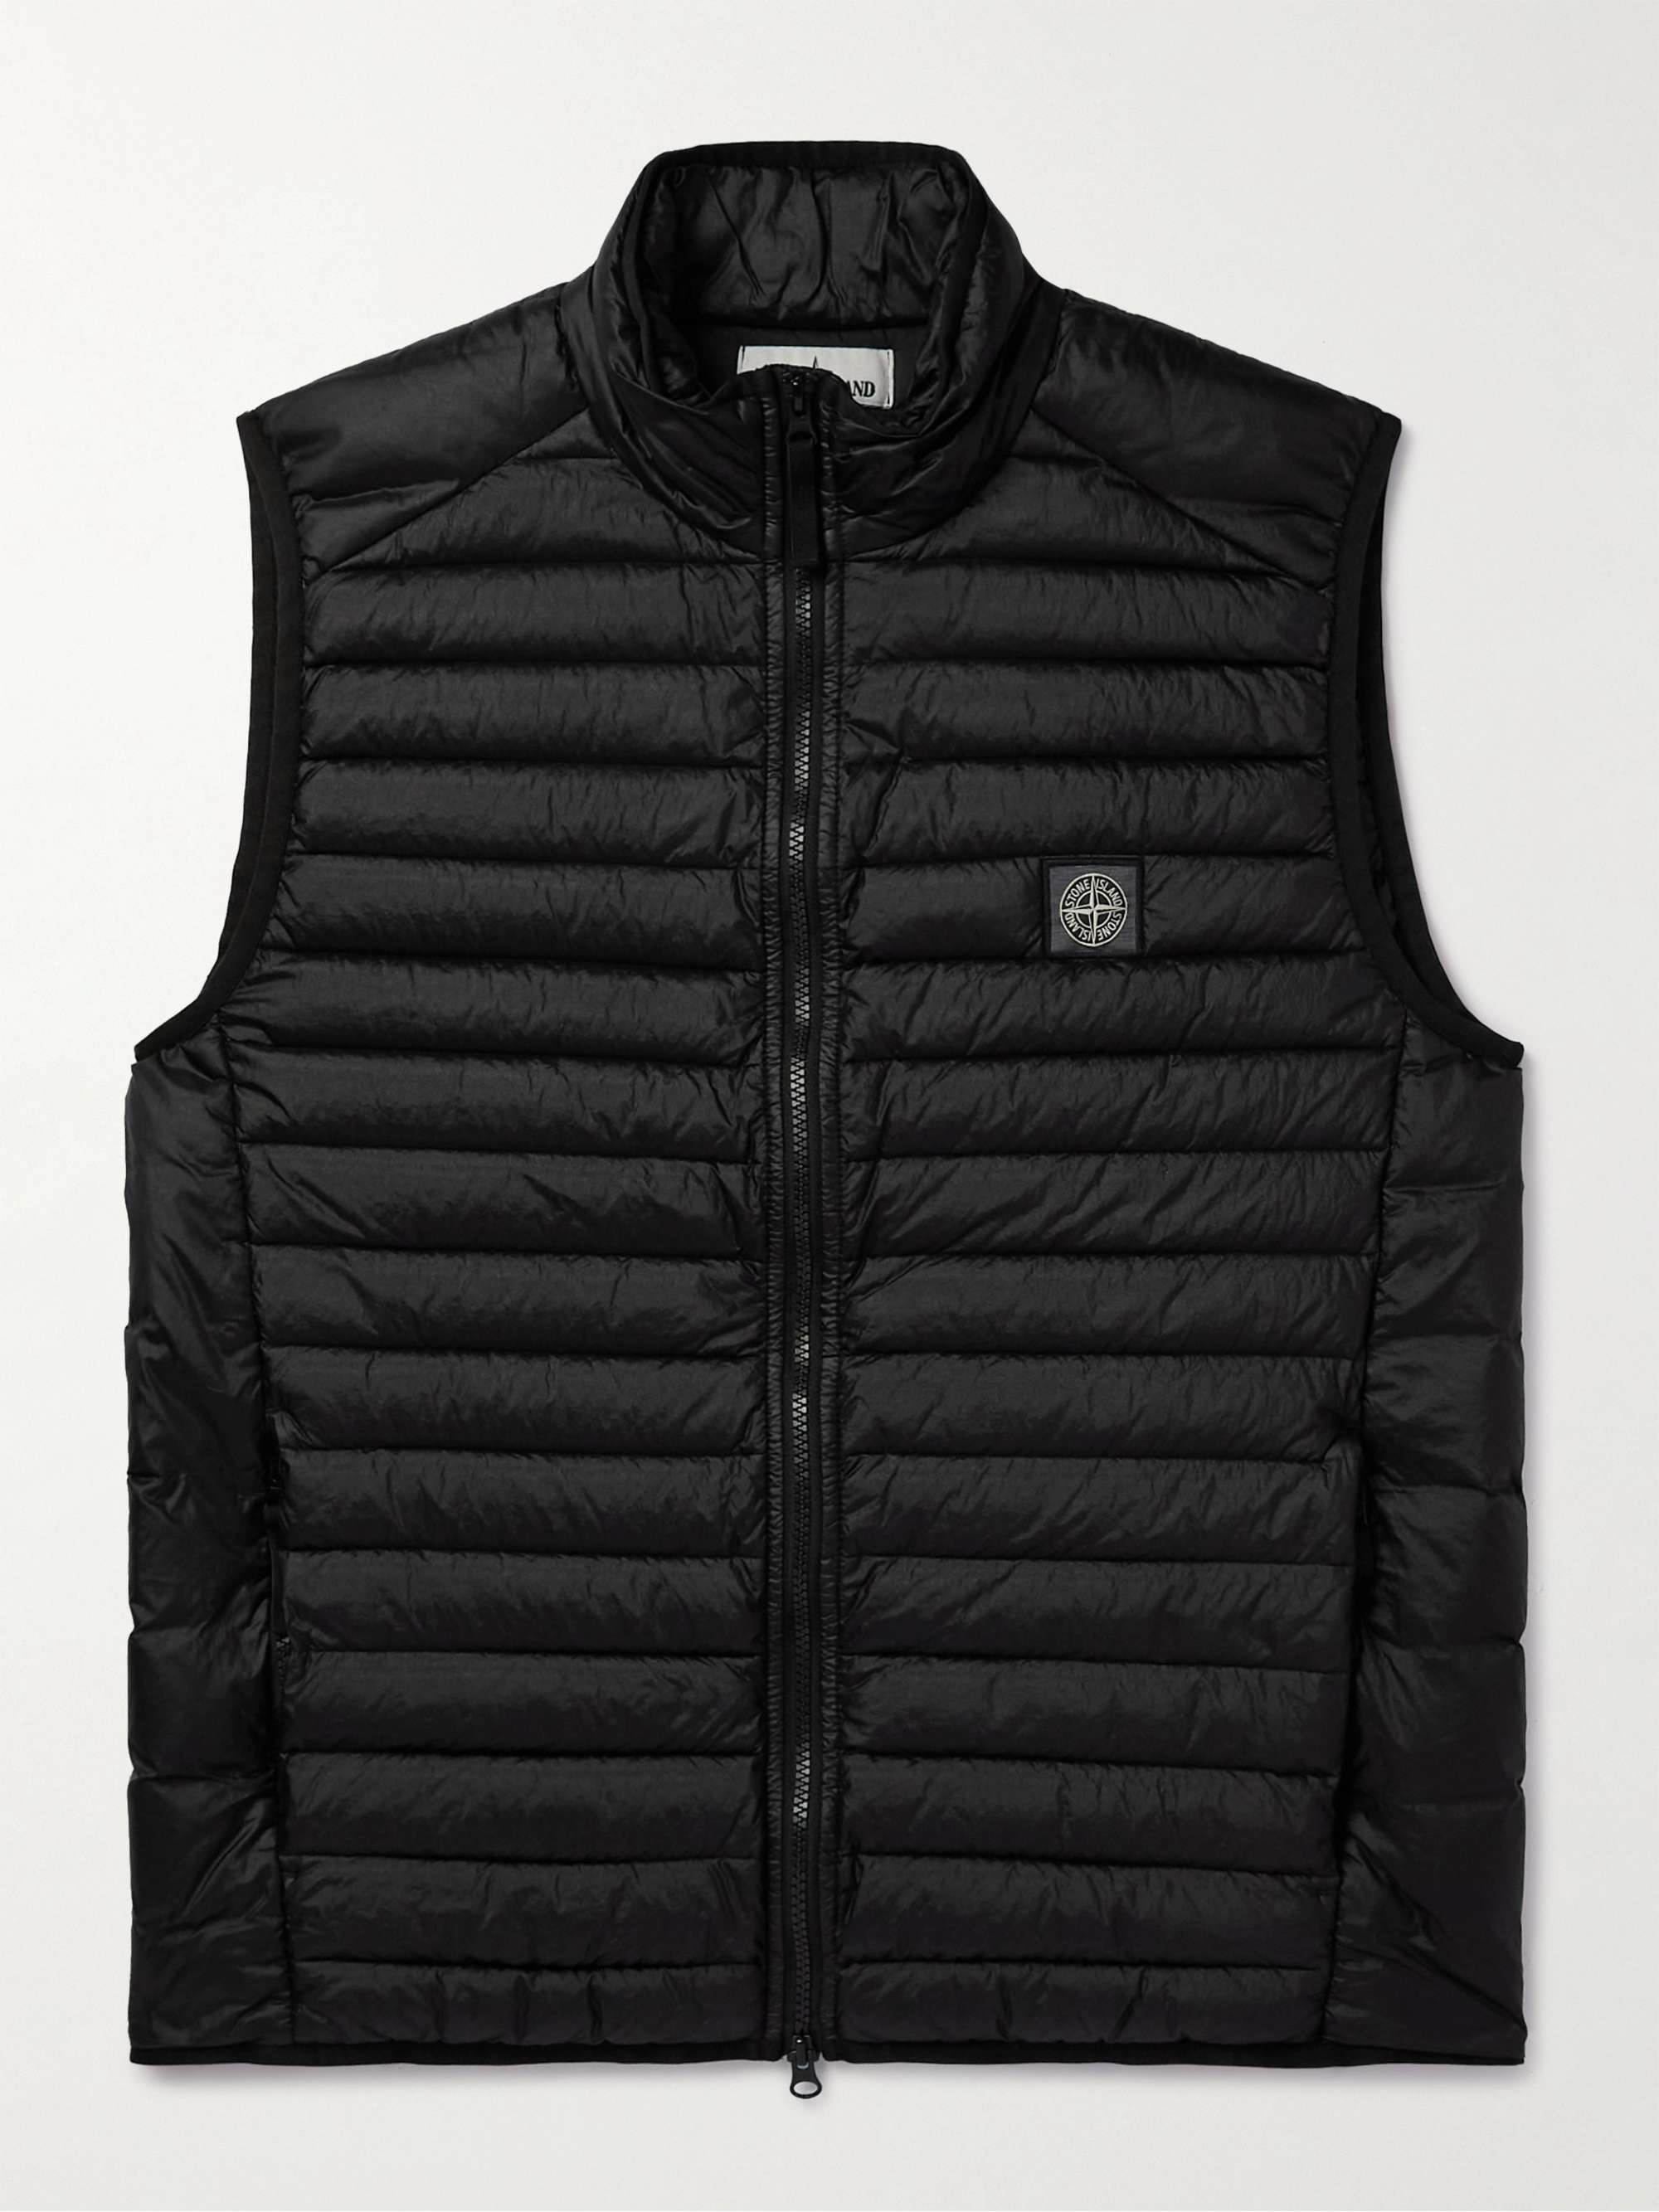 STONE ISLAND Logo-Appliqued Garment-Dyed Quilted Shell Down Gilet,Black